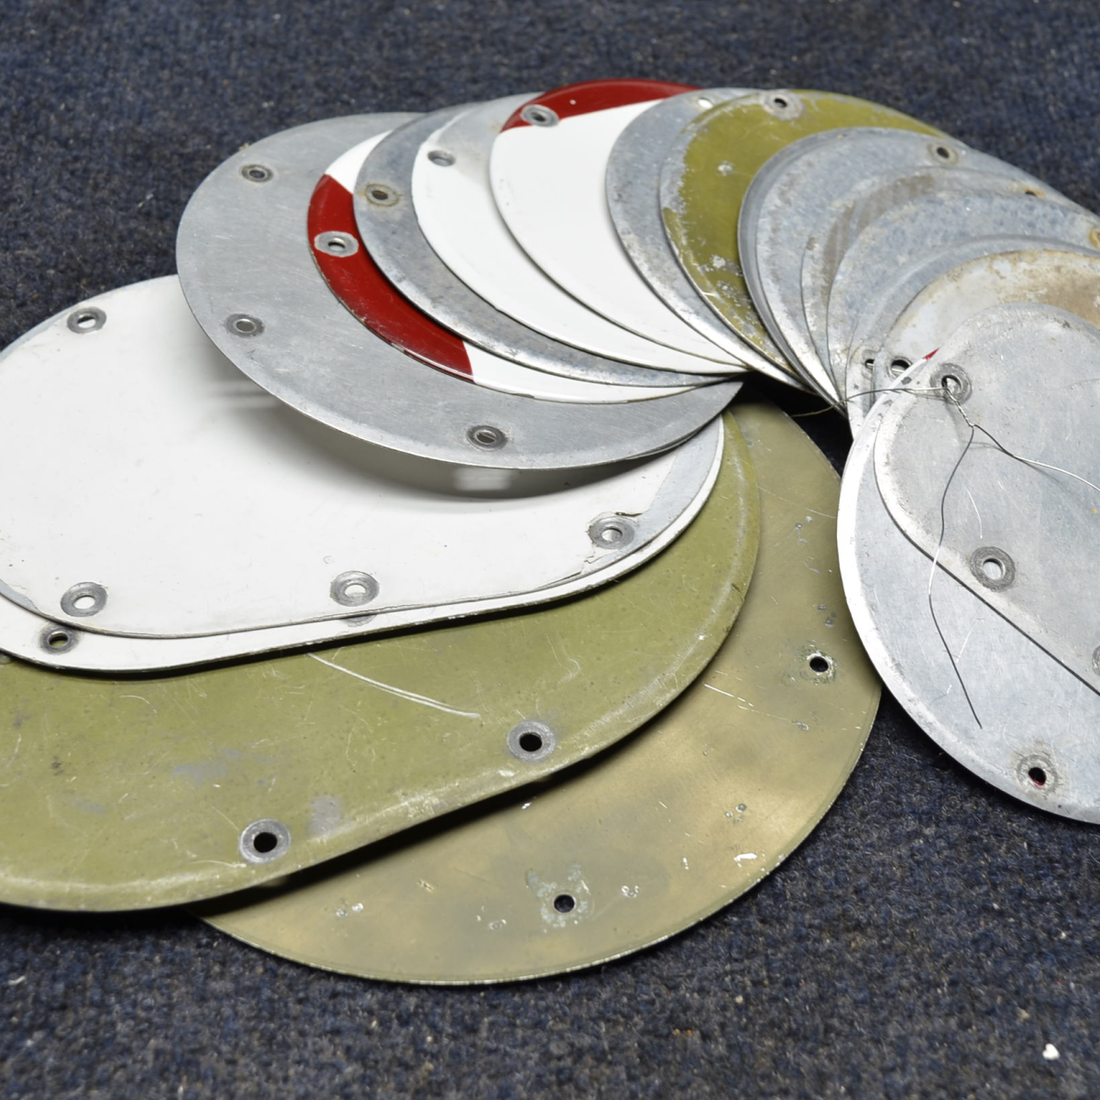 Used aircraft parts for sale, Lot of Cover plates Piper  [part_model] Cessna PA28, 182, 172 LOT OF COVER PLATES. DIFFERENT PLANES MECHANIC SPECIAL